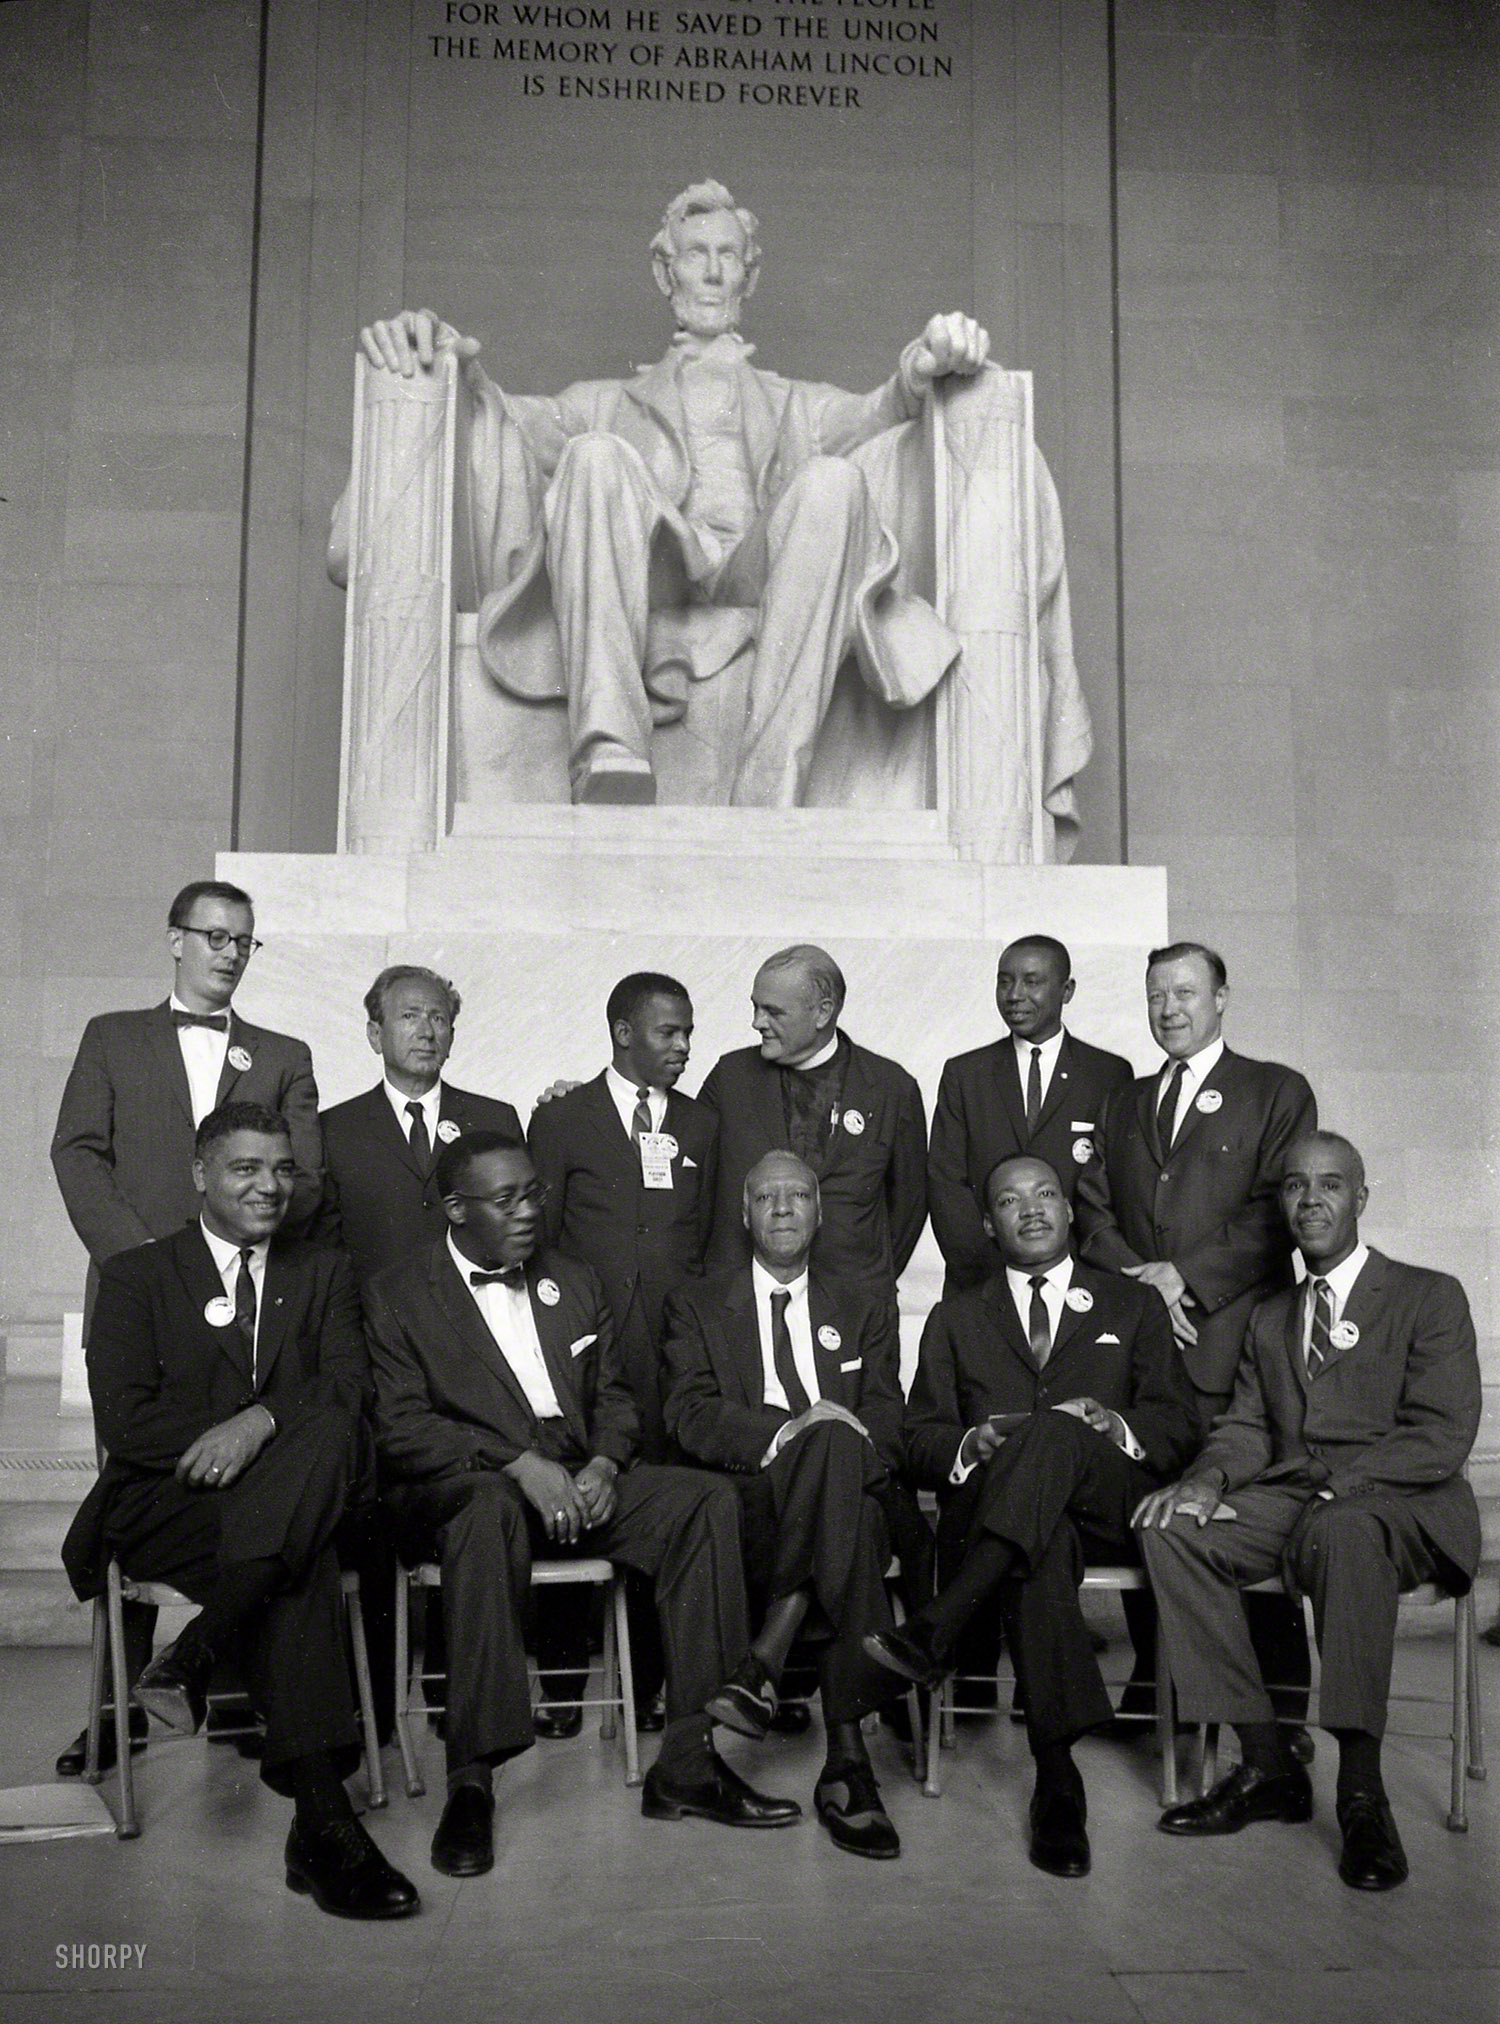 August 1963. "Group portrait of several of the organizers of the March on Washington, among them: Mathew Ahmann, Rabbi Joachim Prinz, John Lewis, the Rev. Eugene Carson Blake, Whitney Young, A. Philip Randolph, the Rev. Martin Luther King Jr., and Roy Wilkins." Photo by Stanley Tetrick for the Look magazine assignment "Negro march on Washington, D.C." View full size.